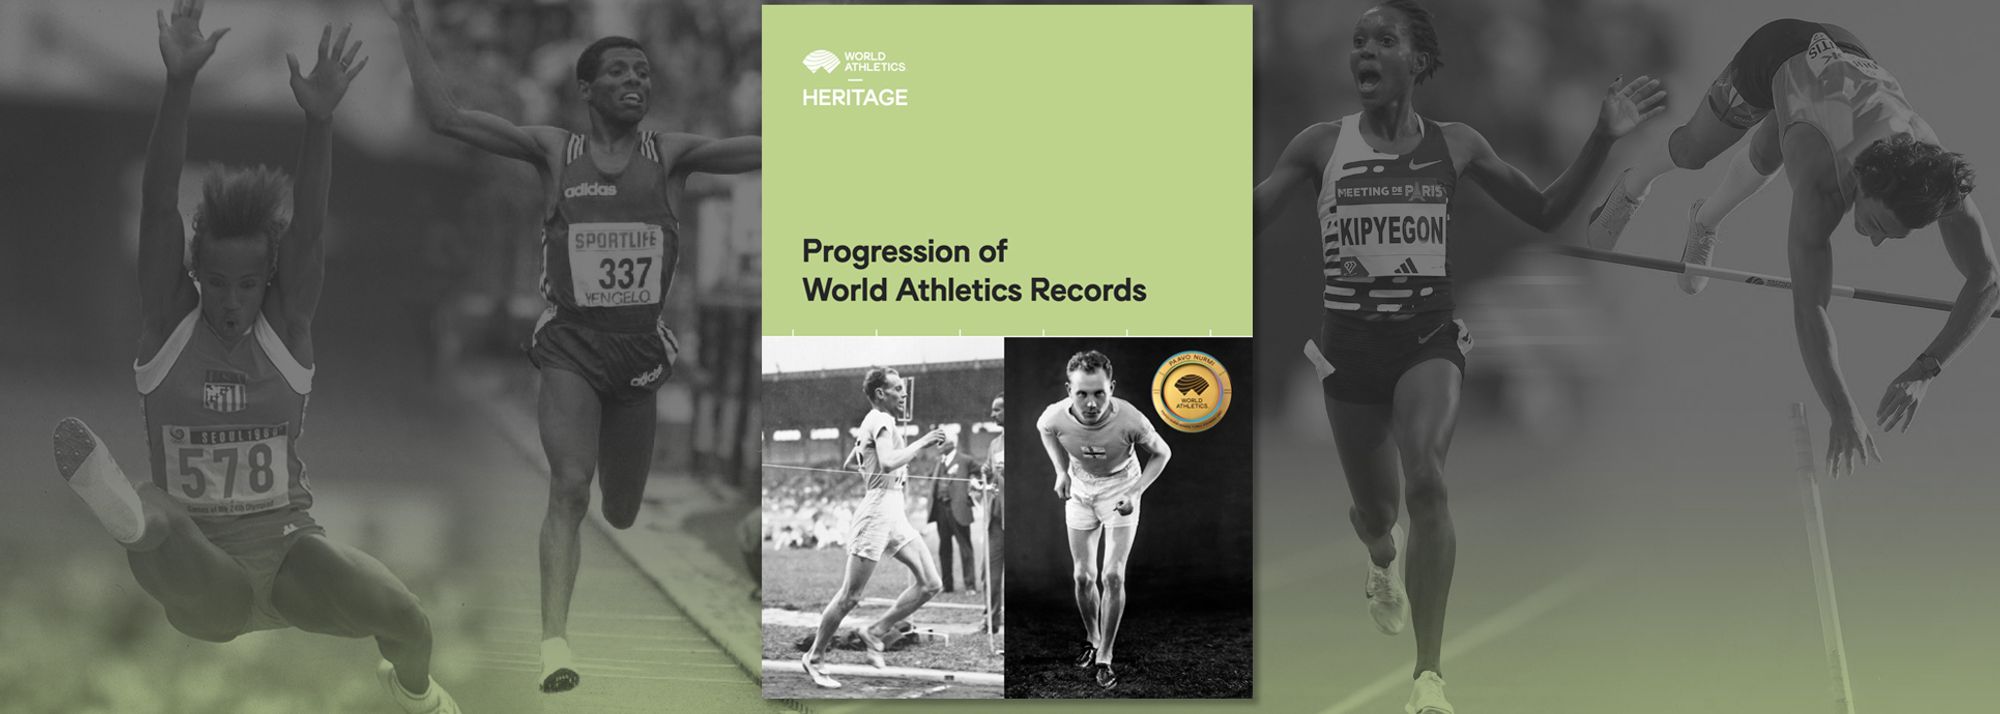 The latest edition of the ‘Progression of World Athletics Records’ has been published by World Athletics Heritage in printed and ebook versions.